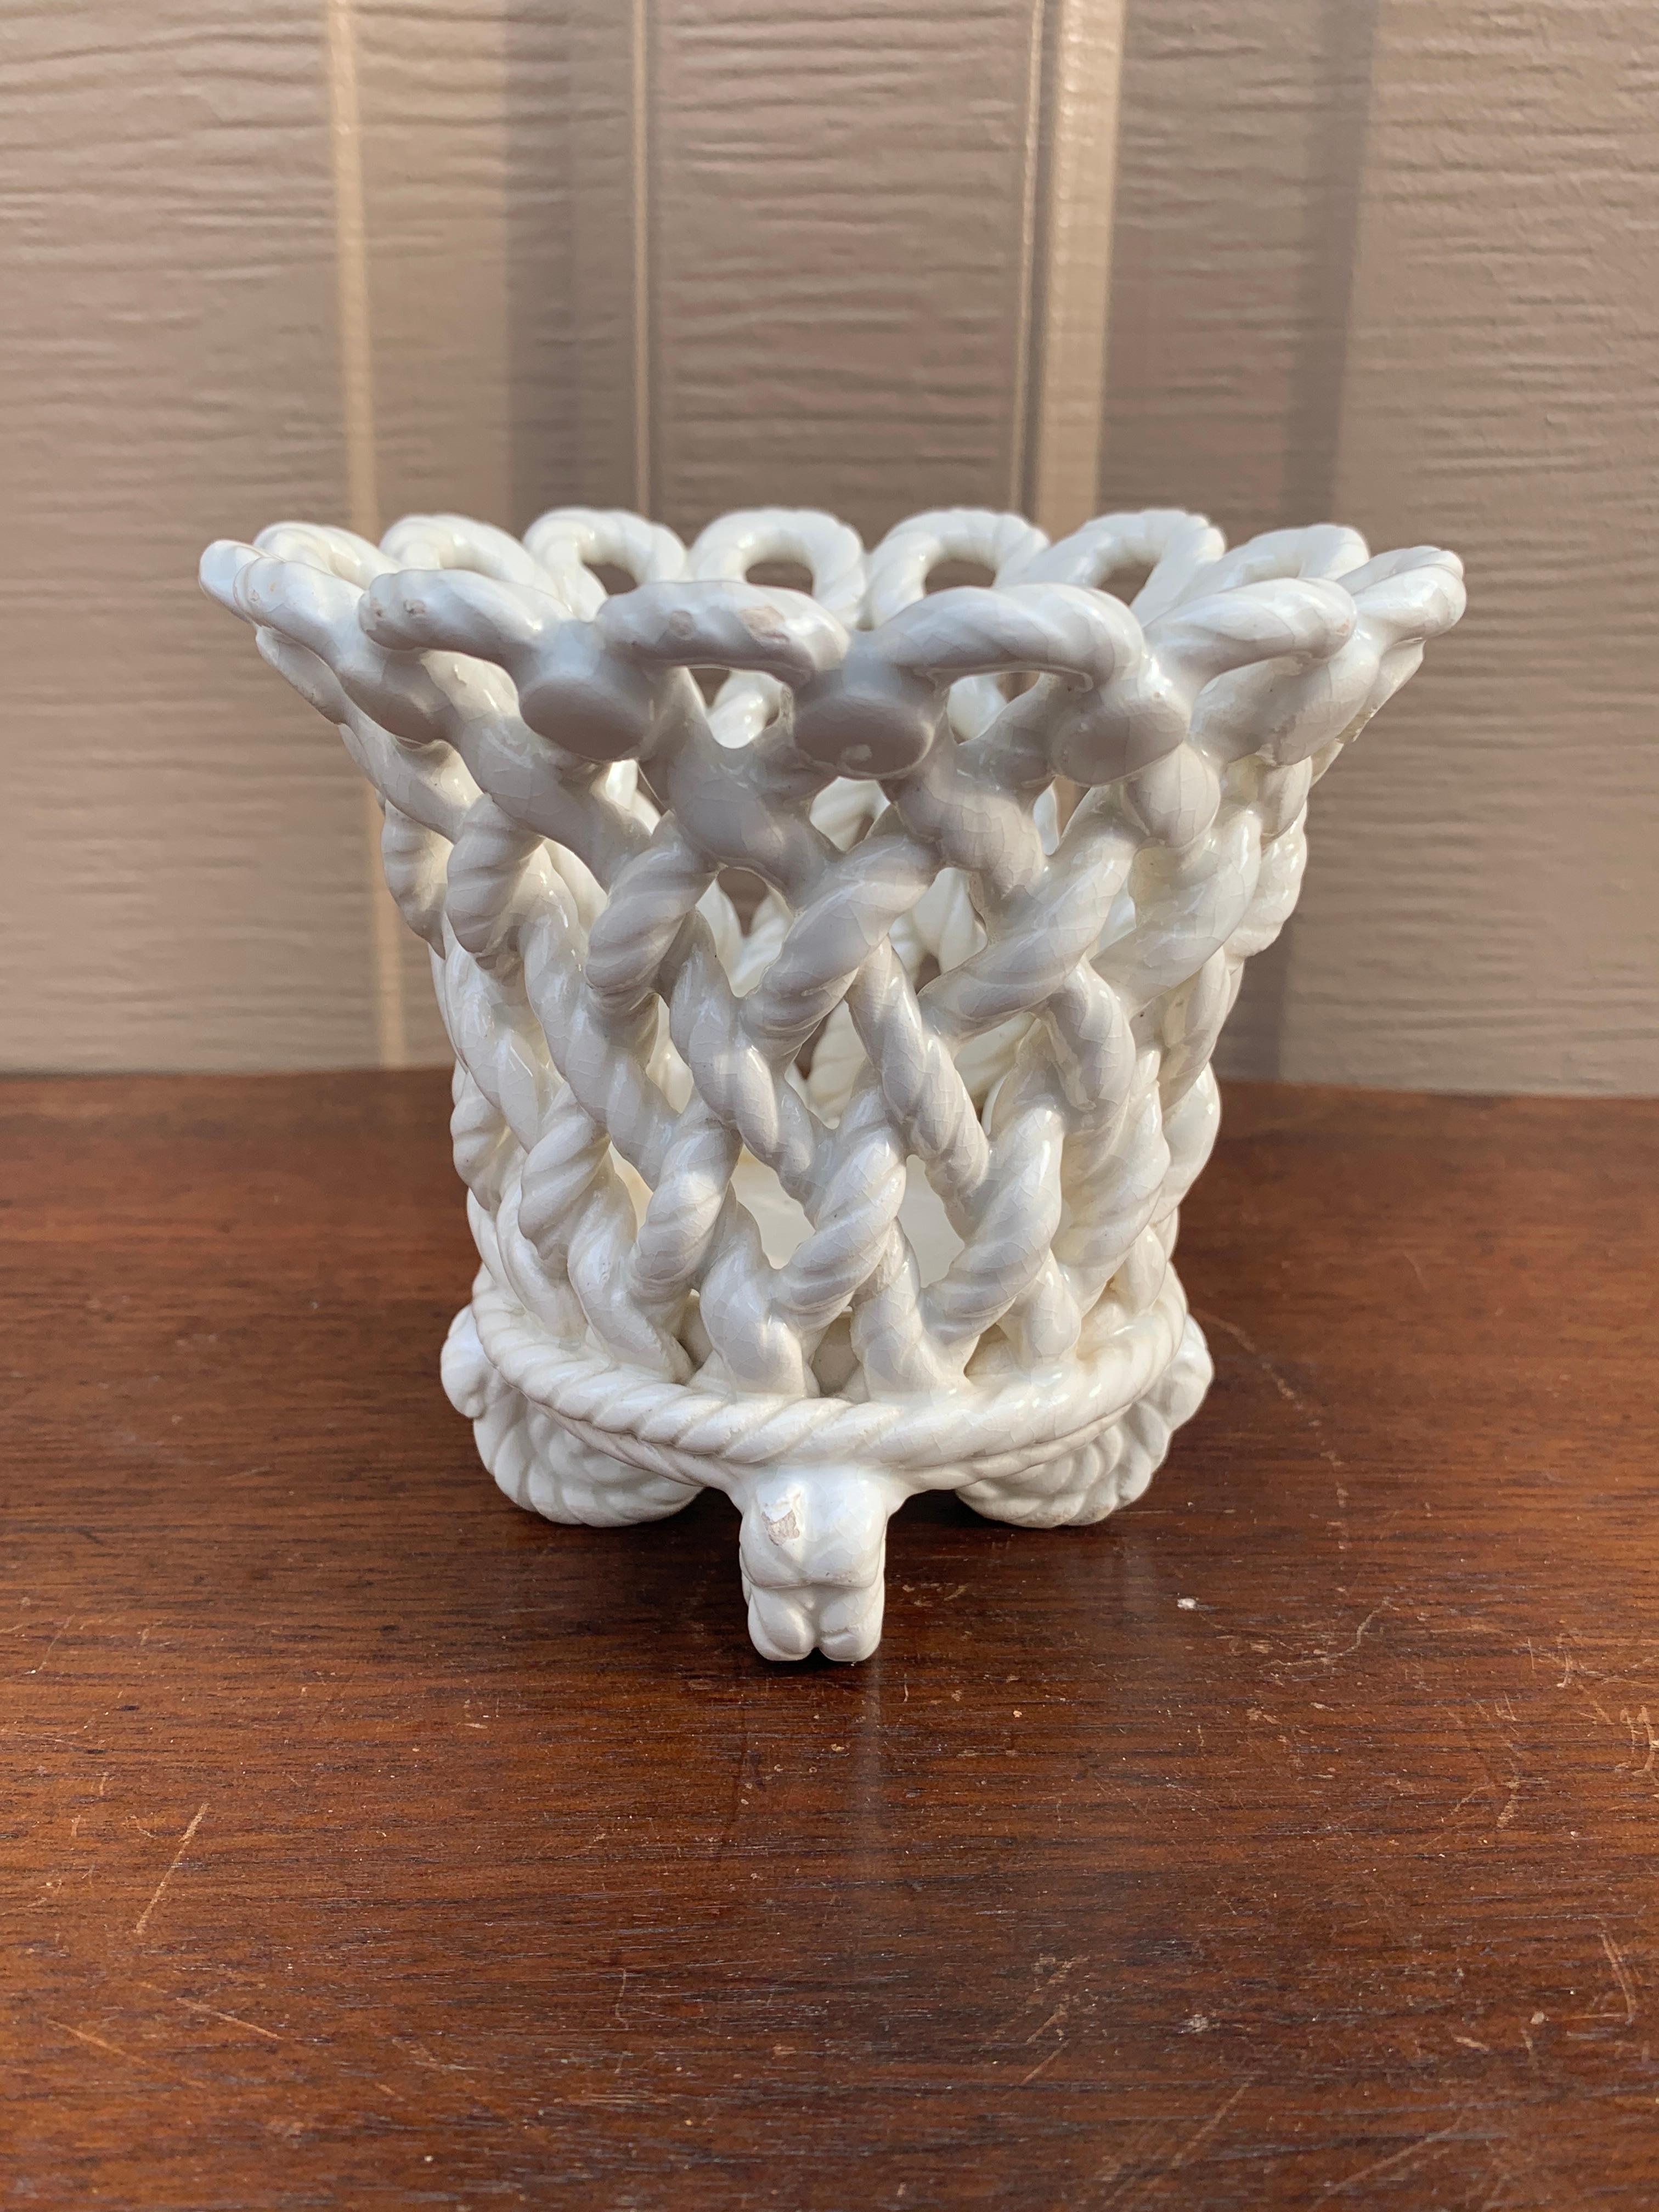 Porcelain French Country White Ceramic Woven Rope Cachepot Basket For Sale